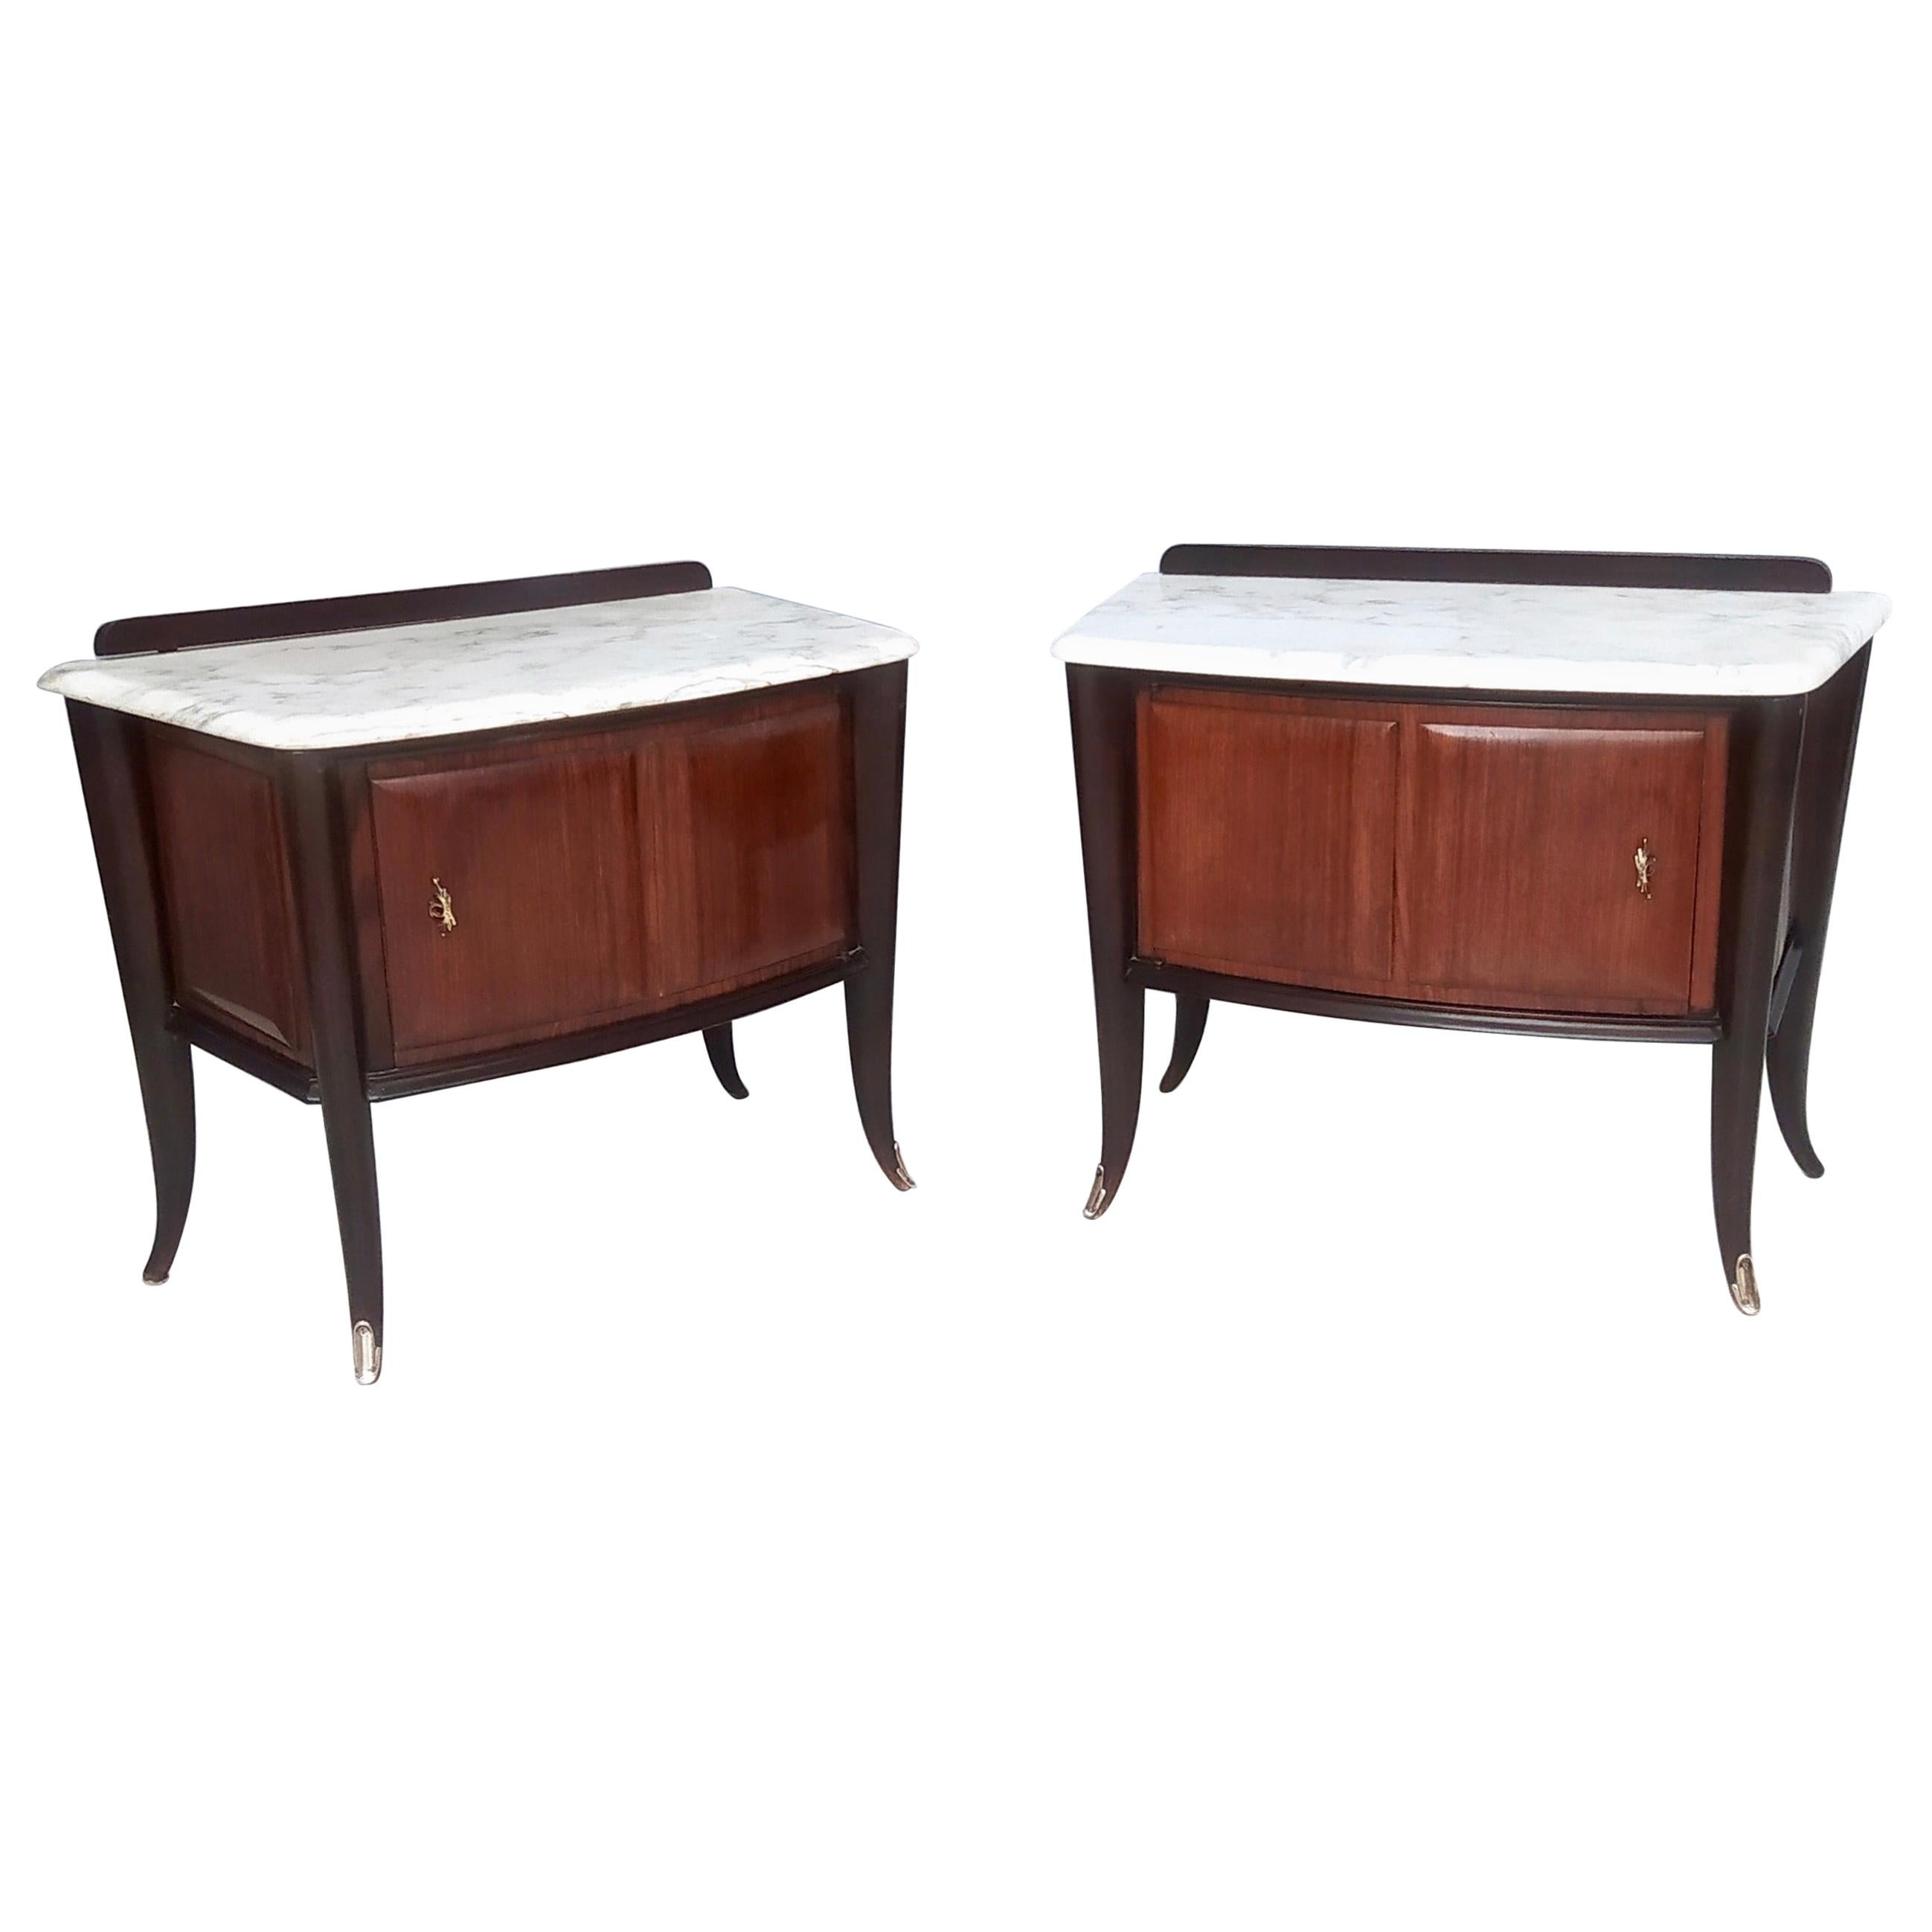 Pair of Vintage Walnut Nightstands Produced by Dassi with Carrara Marble Top